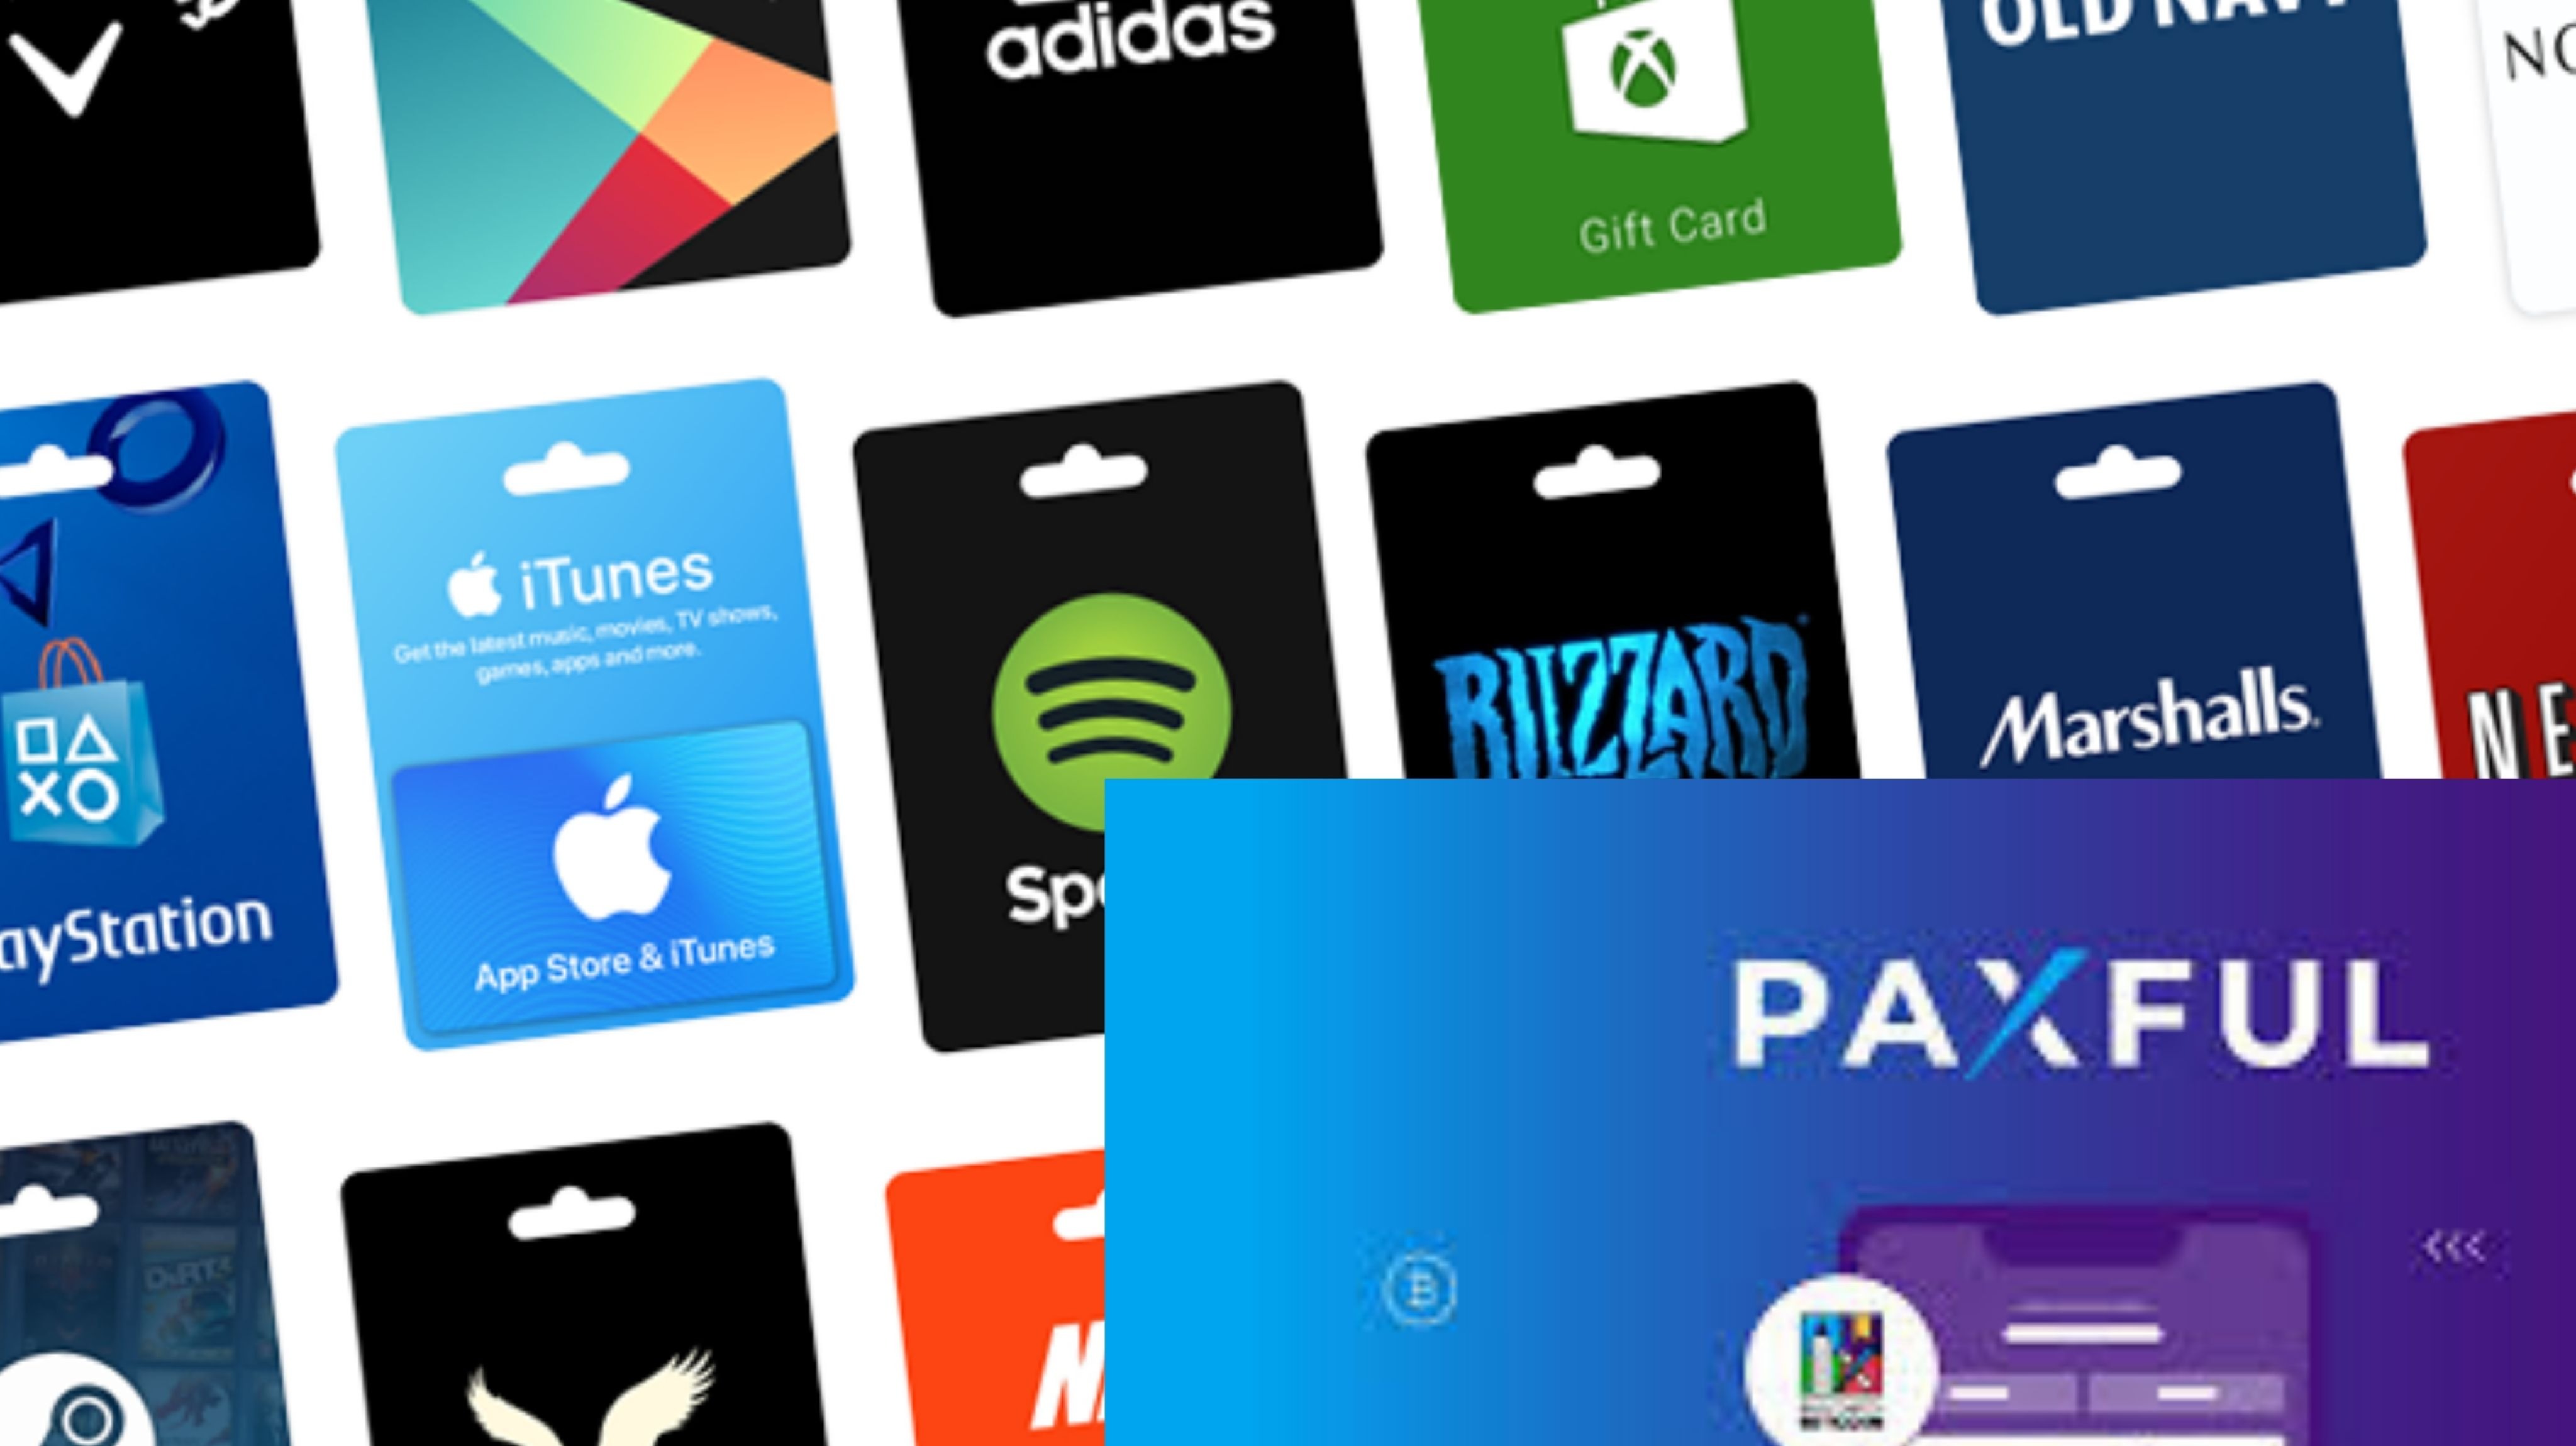 6 Best Paxful Alternatives To Sell Gift Cards In Nigeria - Cardtonic